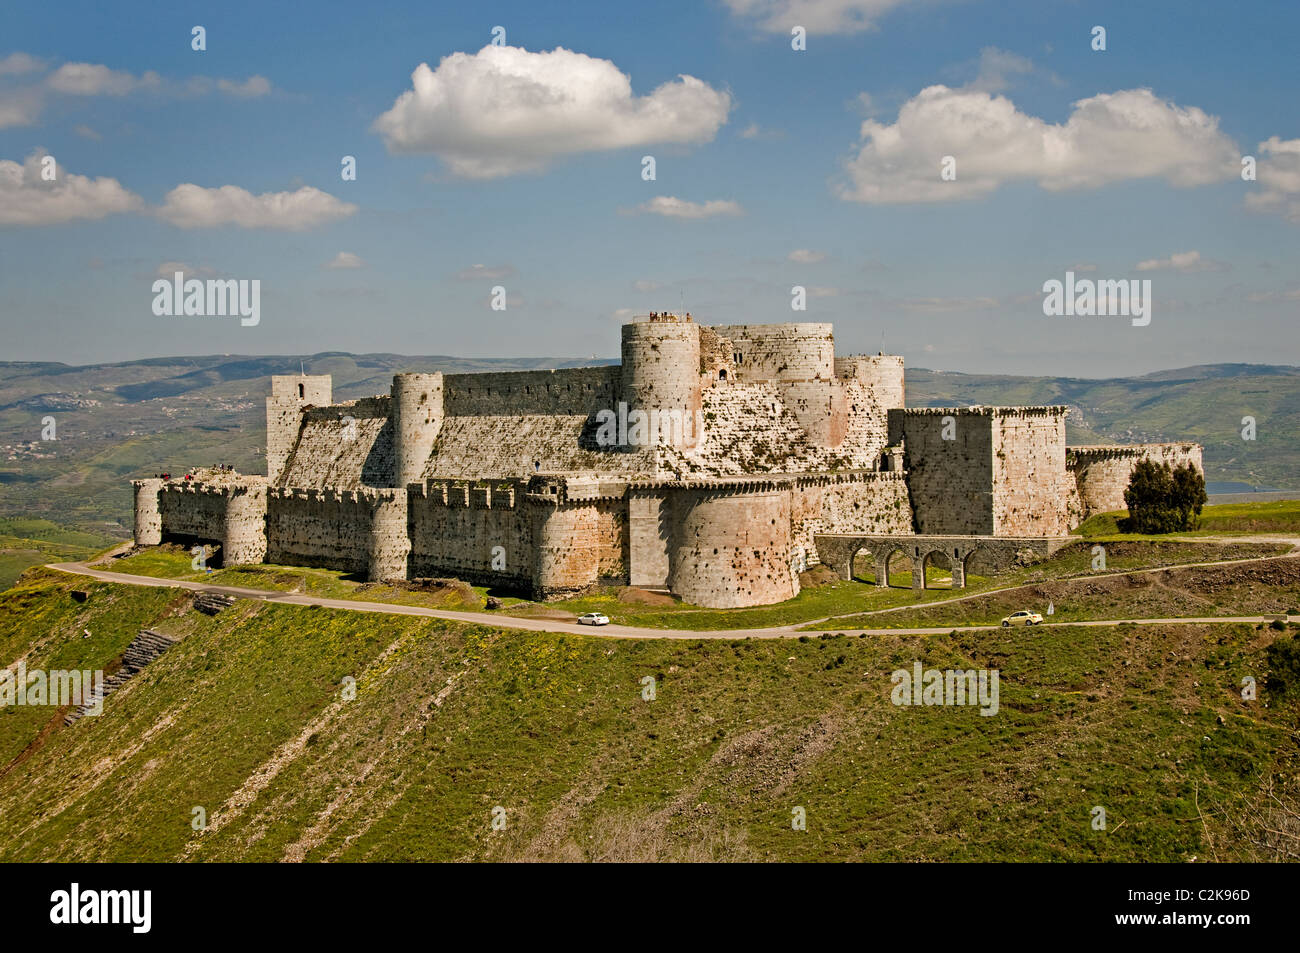 Syria Crac Krak des Chevaliers medieval Castle of the Knights or Quala'at al-Hosn Crusaders near Homs Stock Photo